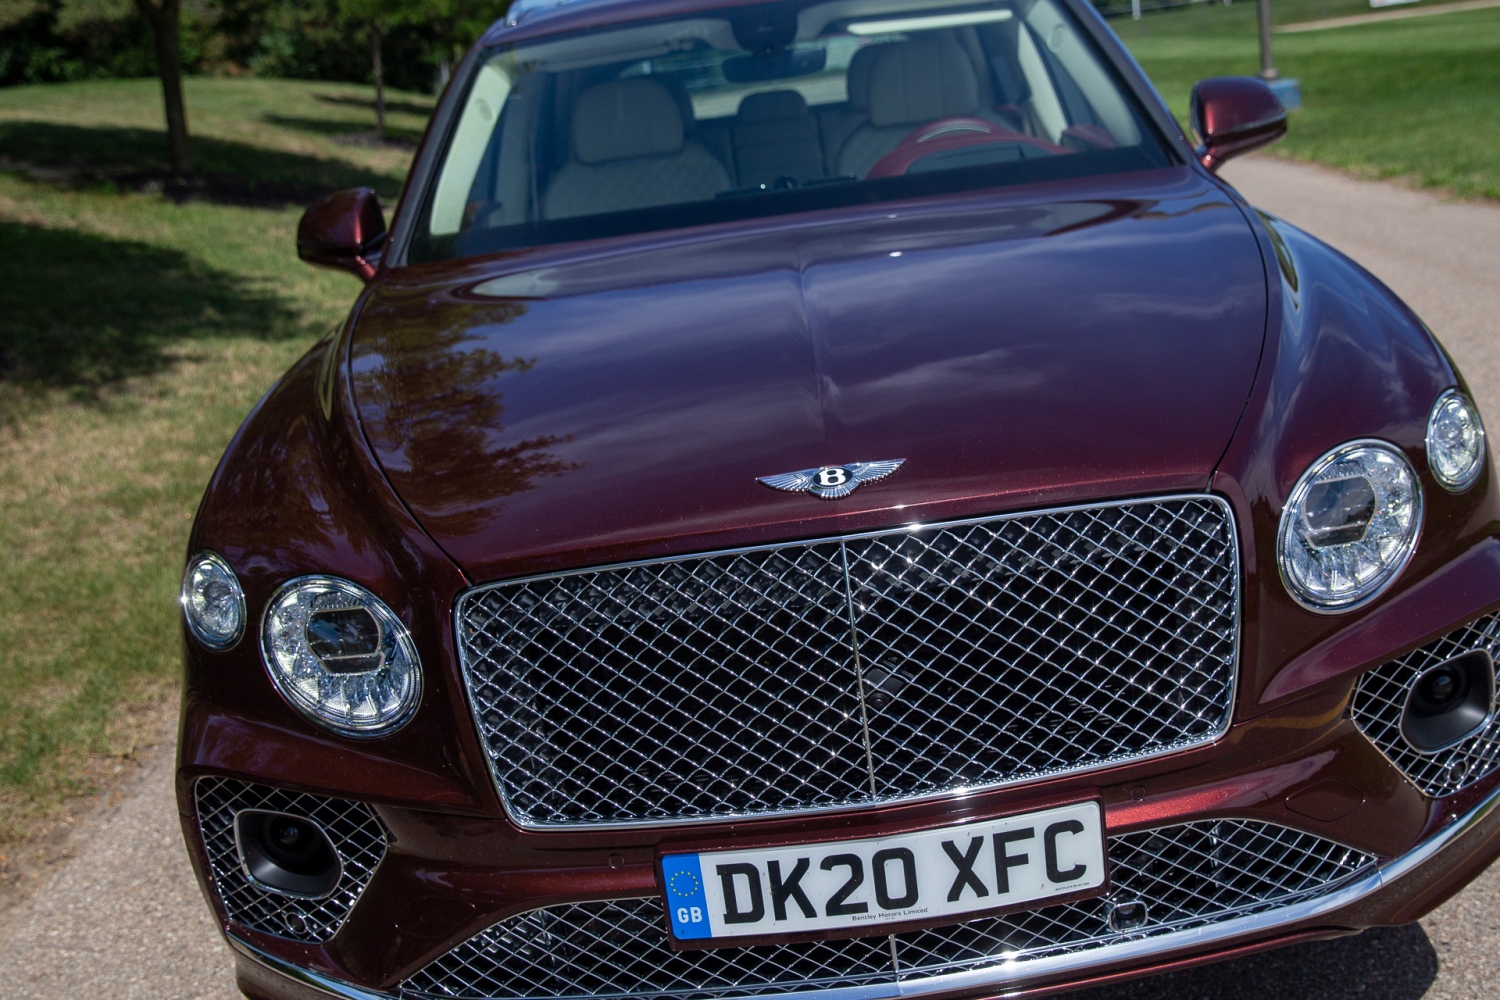 3 thoughts after 24 hours in the $177,000 Bentley Bentayga | TechCrunch